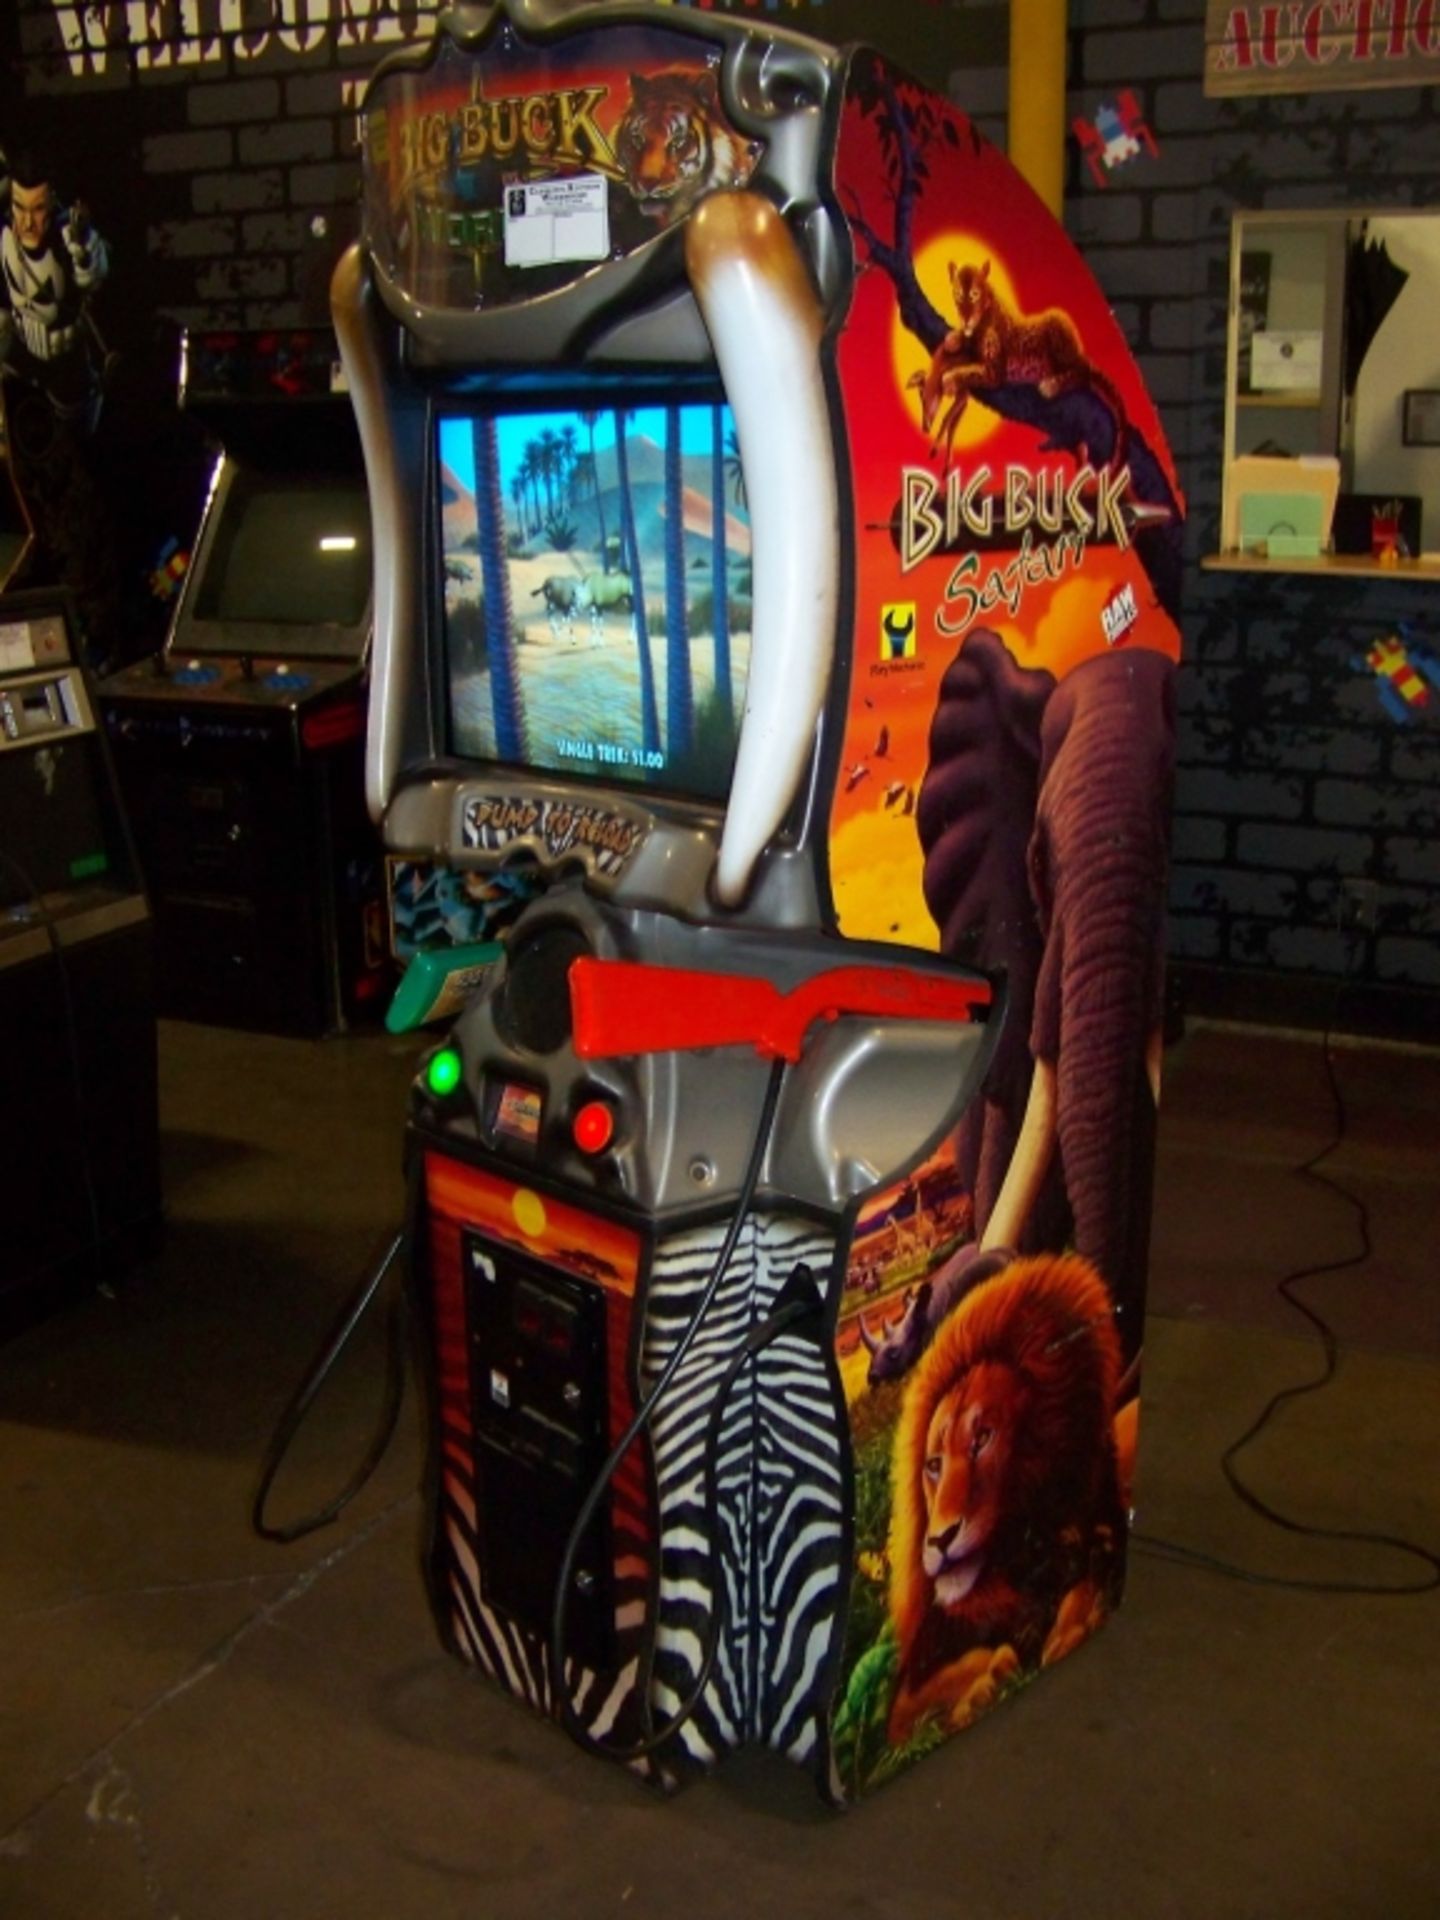 BIG BUCK HUNTER SAFARI RAW THRILLS ARCADE GAME Item is in used condition. Evidence of wear and - Image 2 of 5